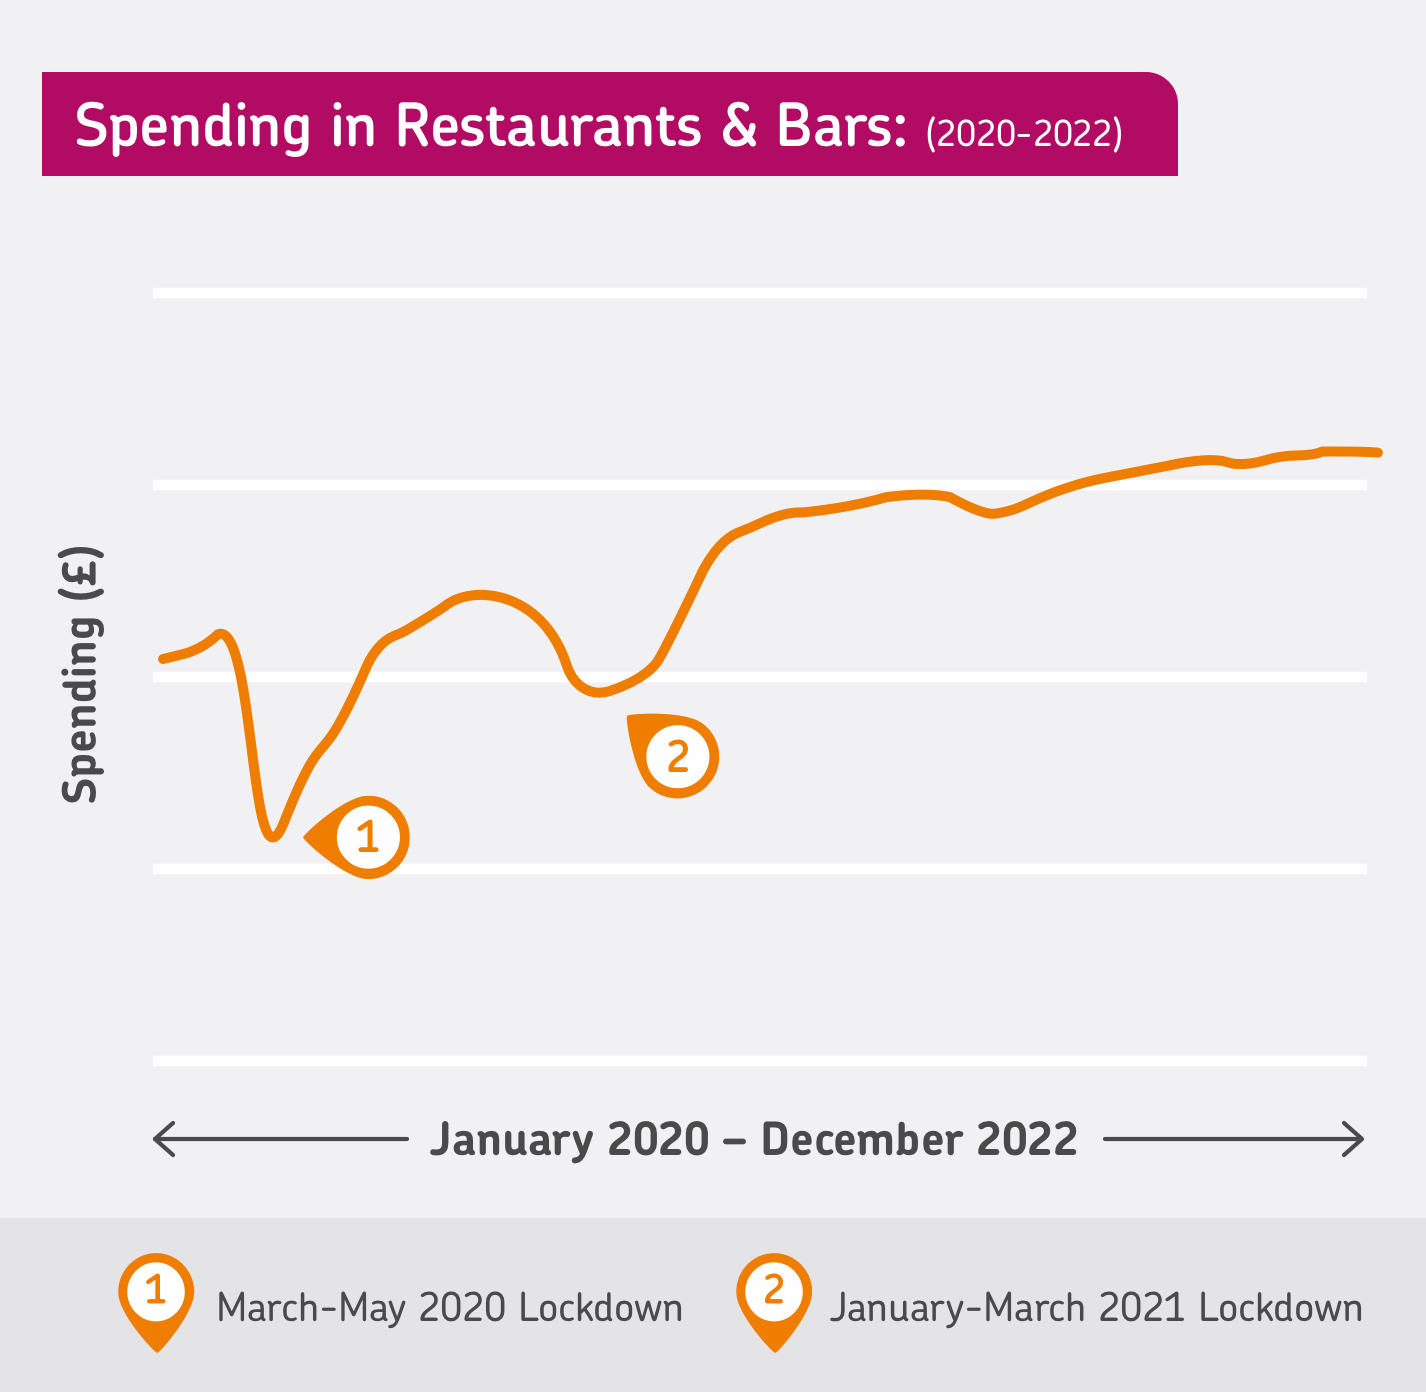 Graph displaying UK consumer spending in restaurants and bars from January 2020 to December 2022